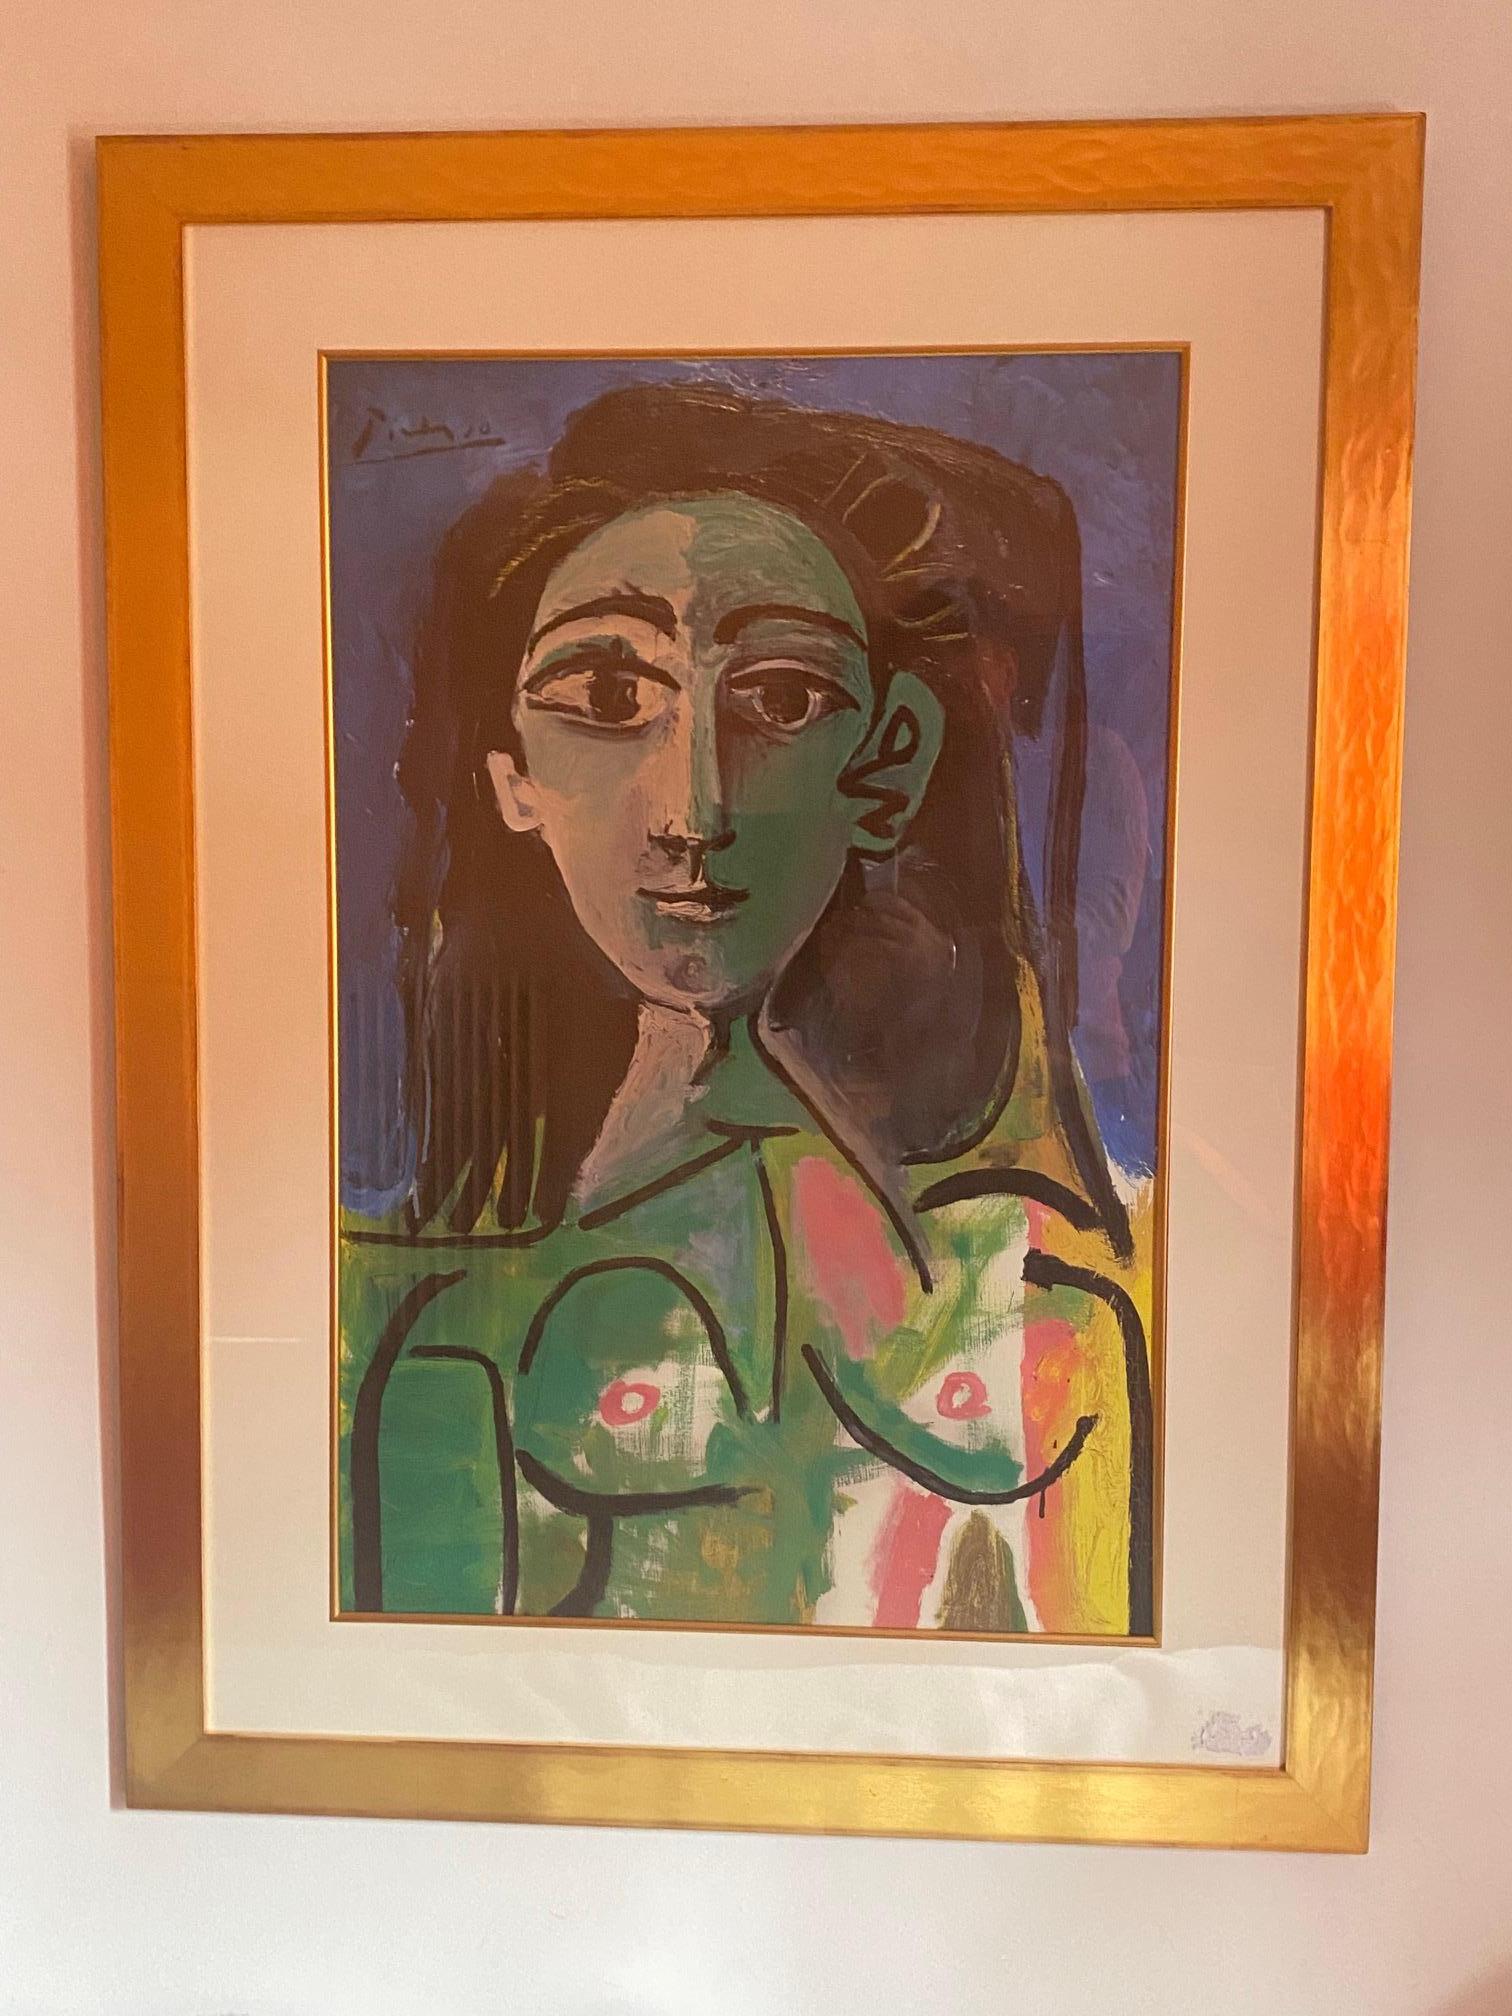 Pablo Picasso "THE DREAM" Estate Signed Limited Edition Art Giclee 26" x 20" 